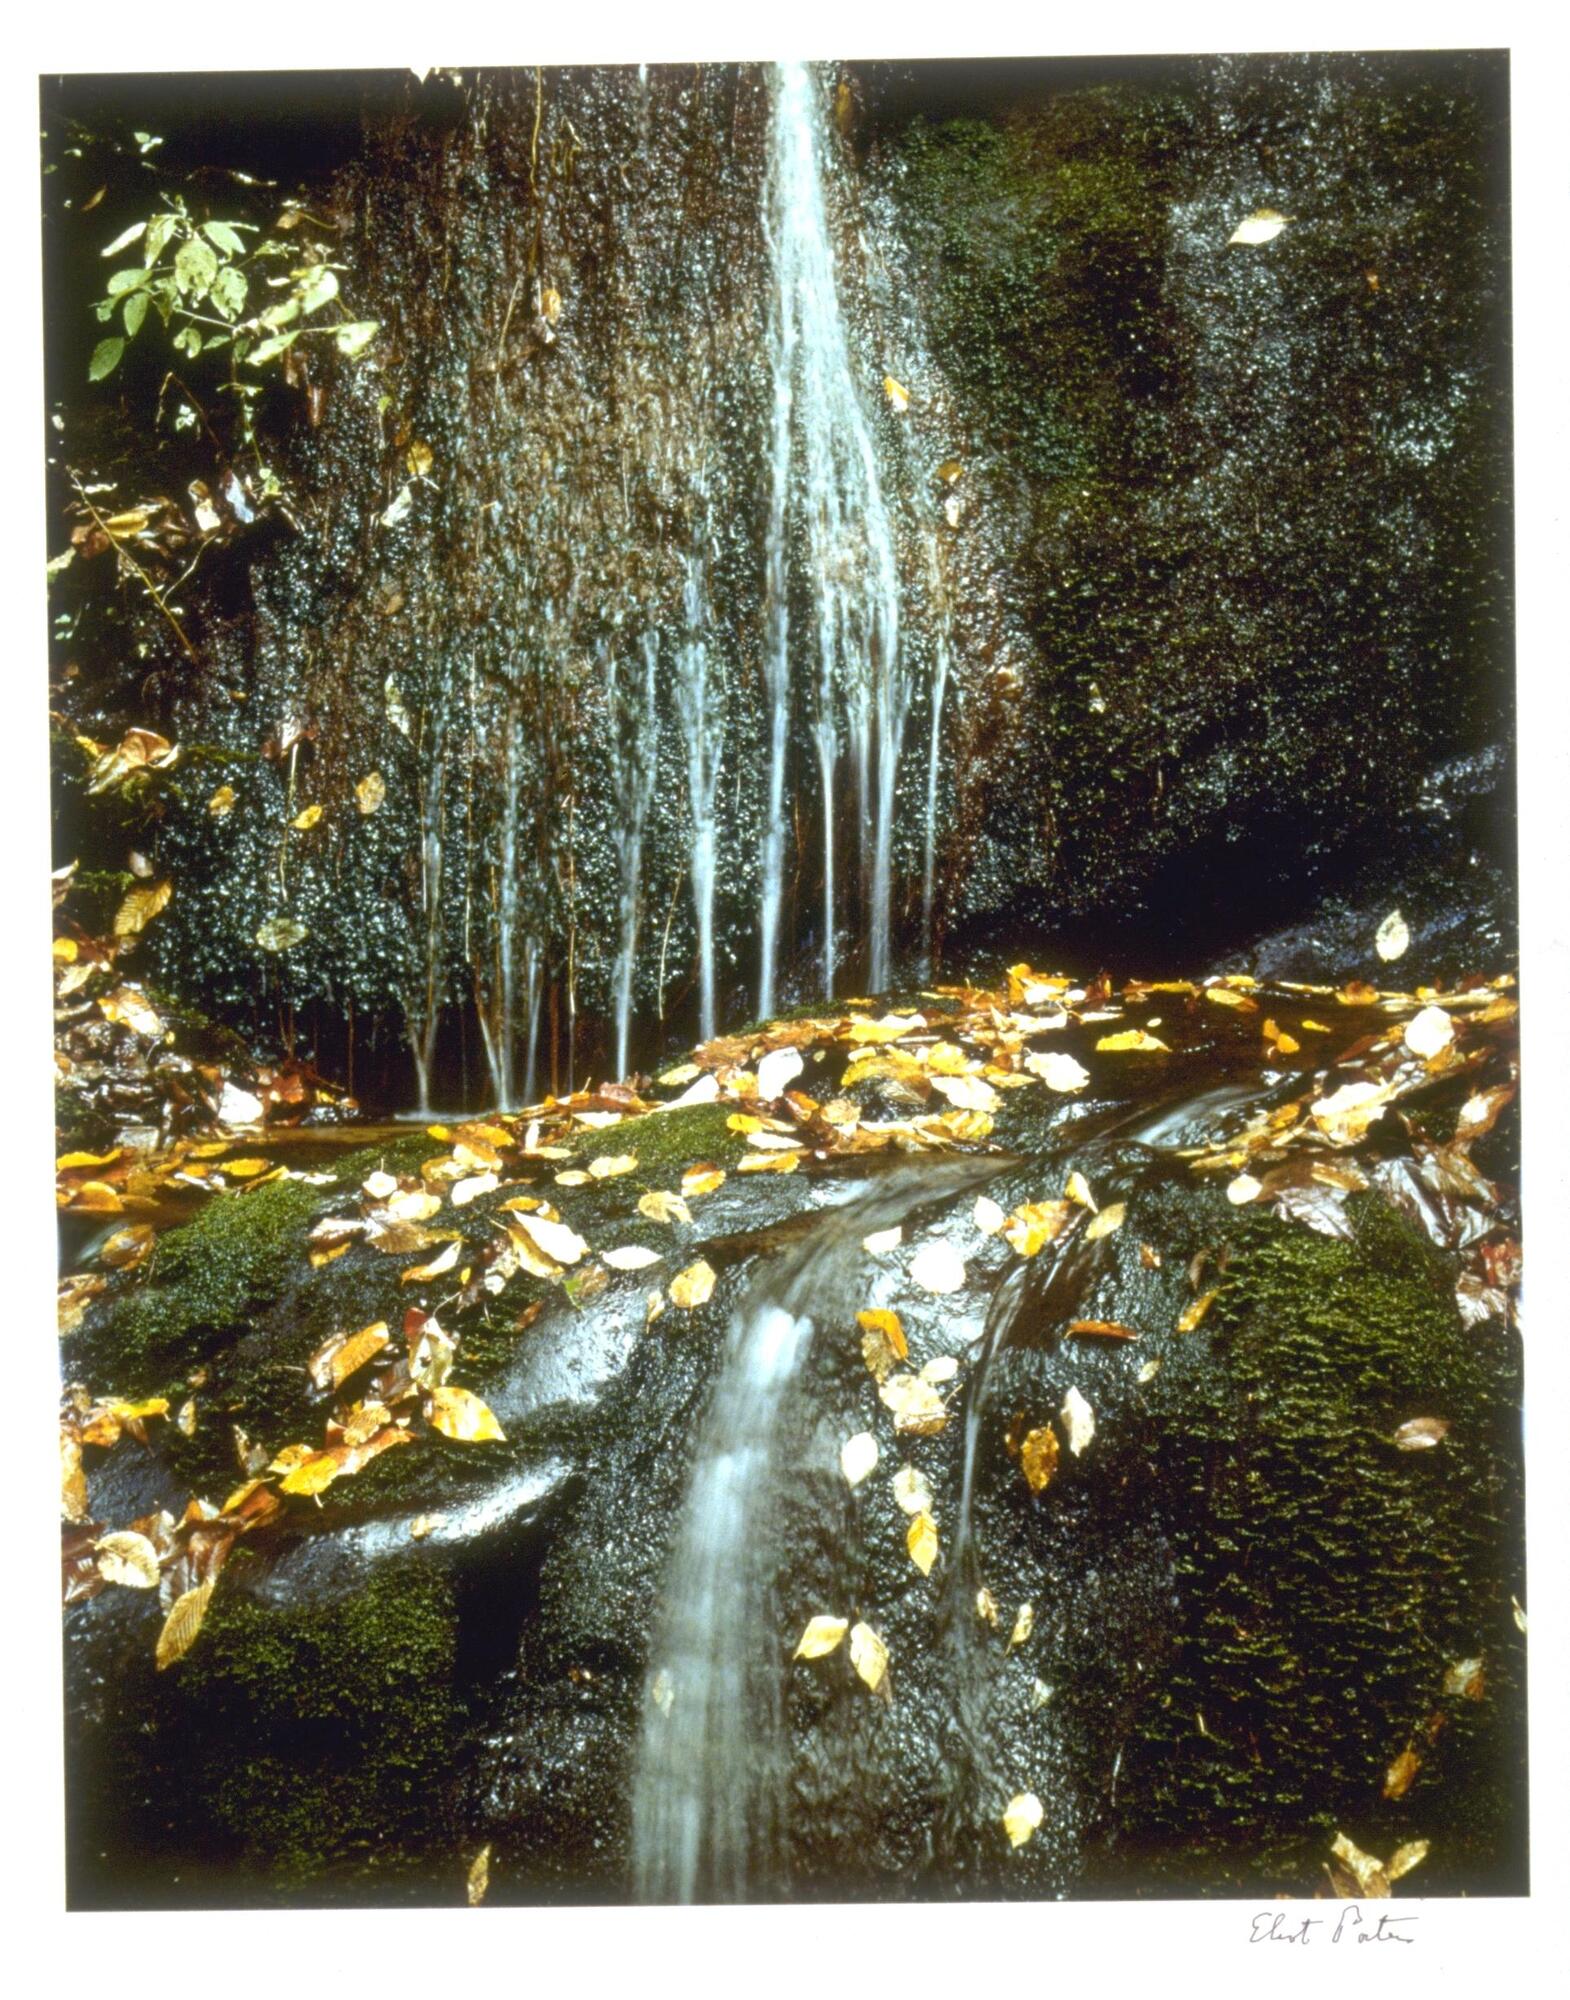 This photograph depicts a close-up view of a small forest stream running down a series of boulders.